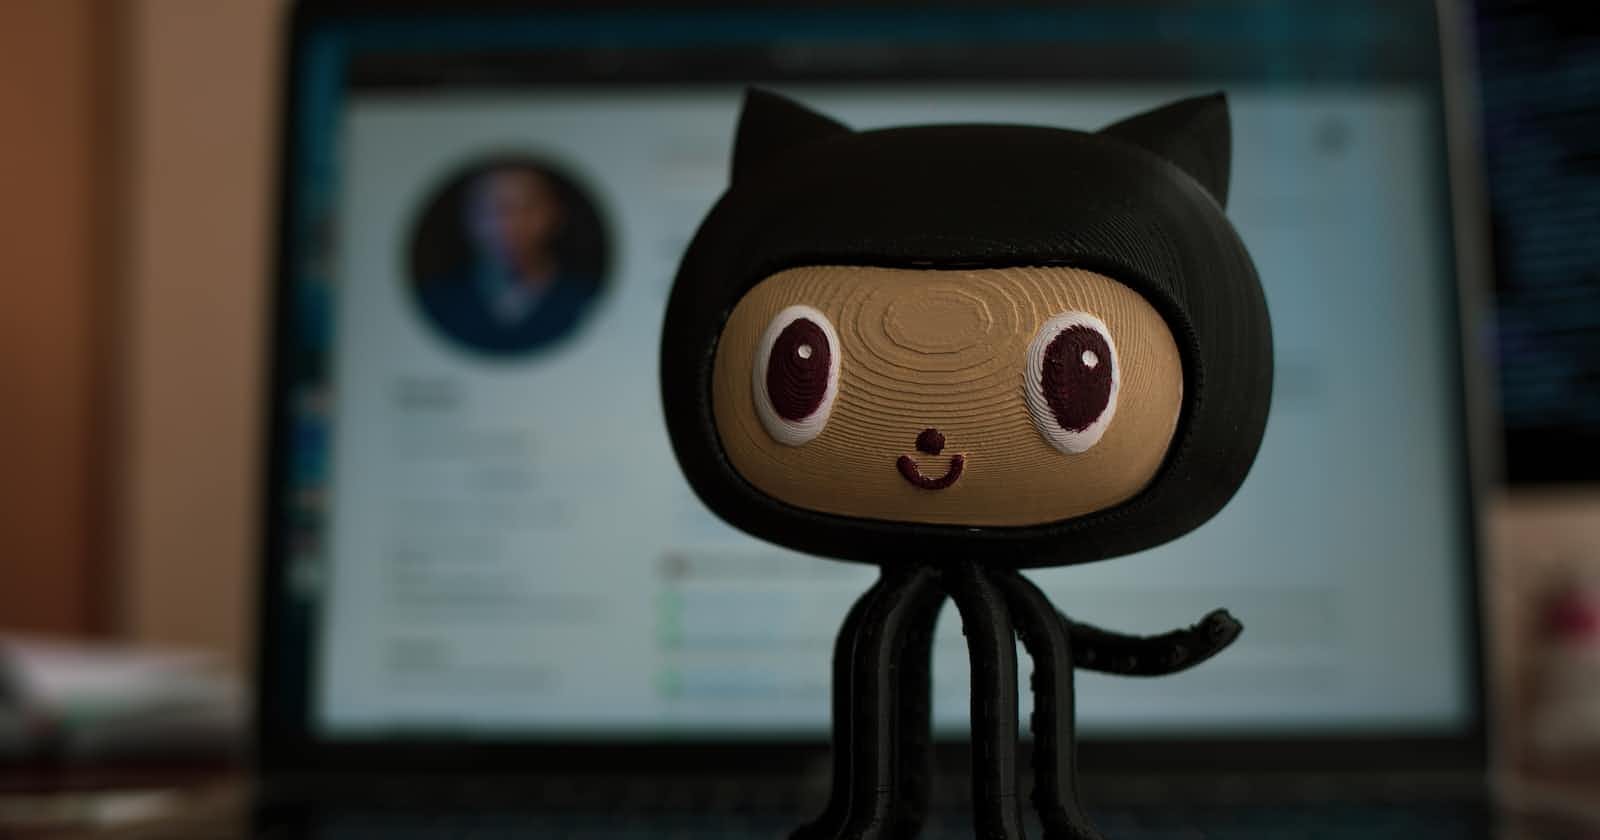 Push your first commit to Github